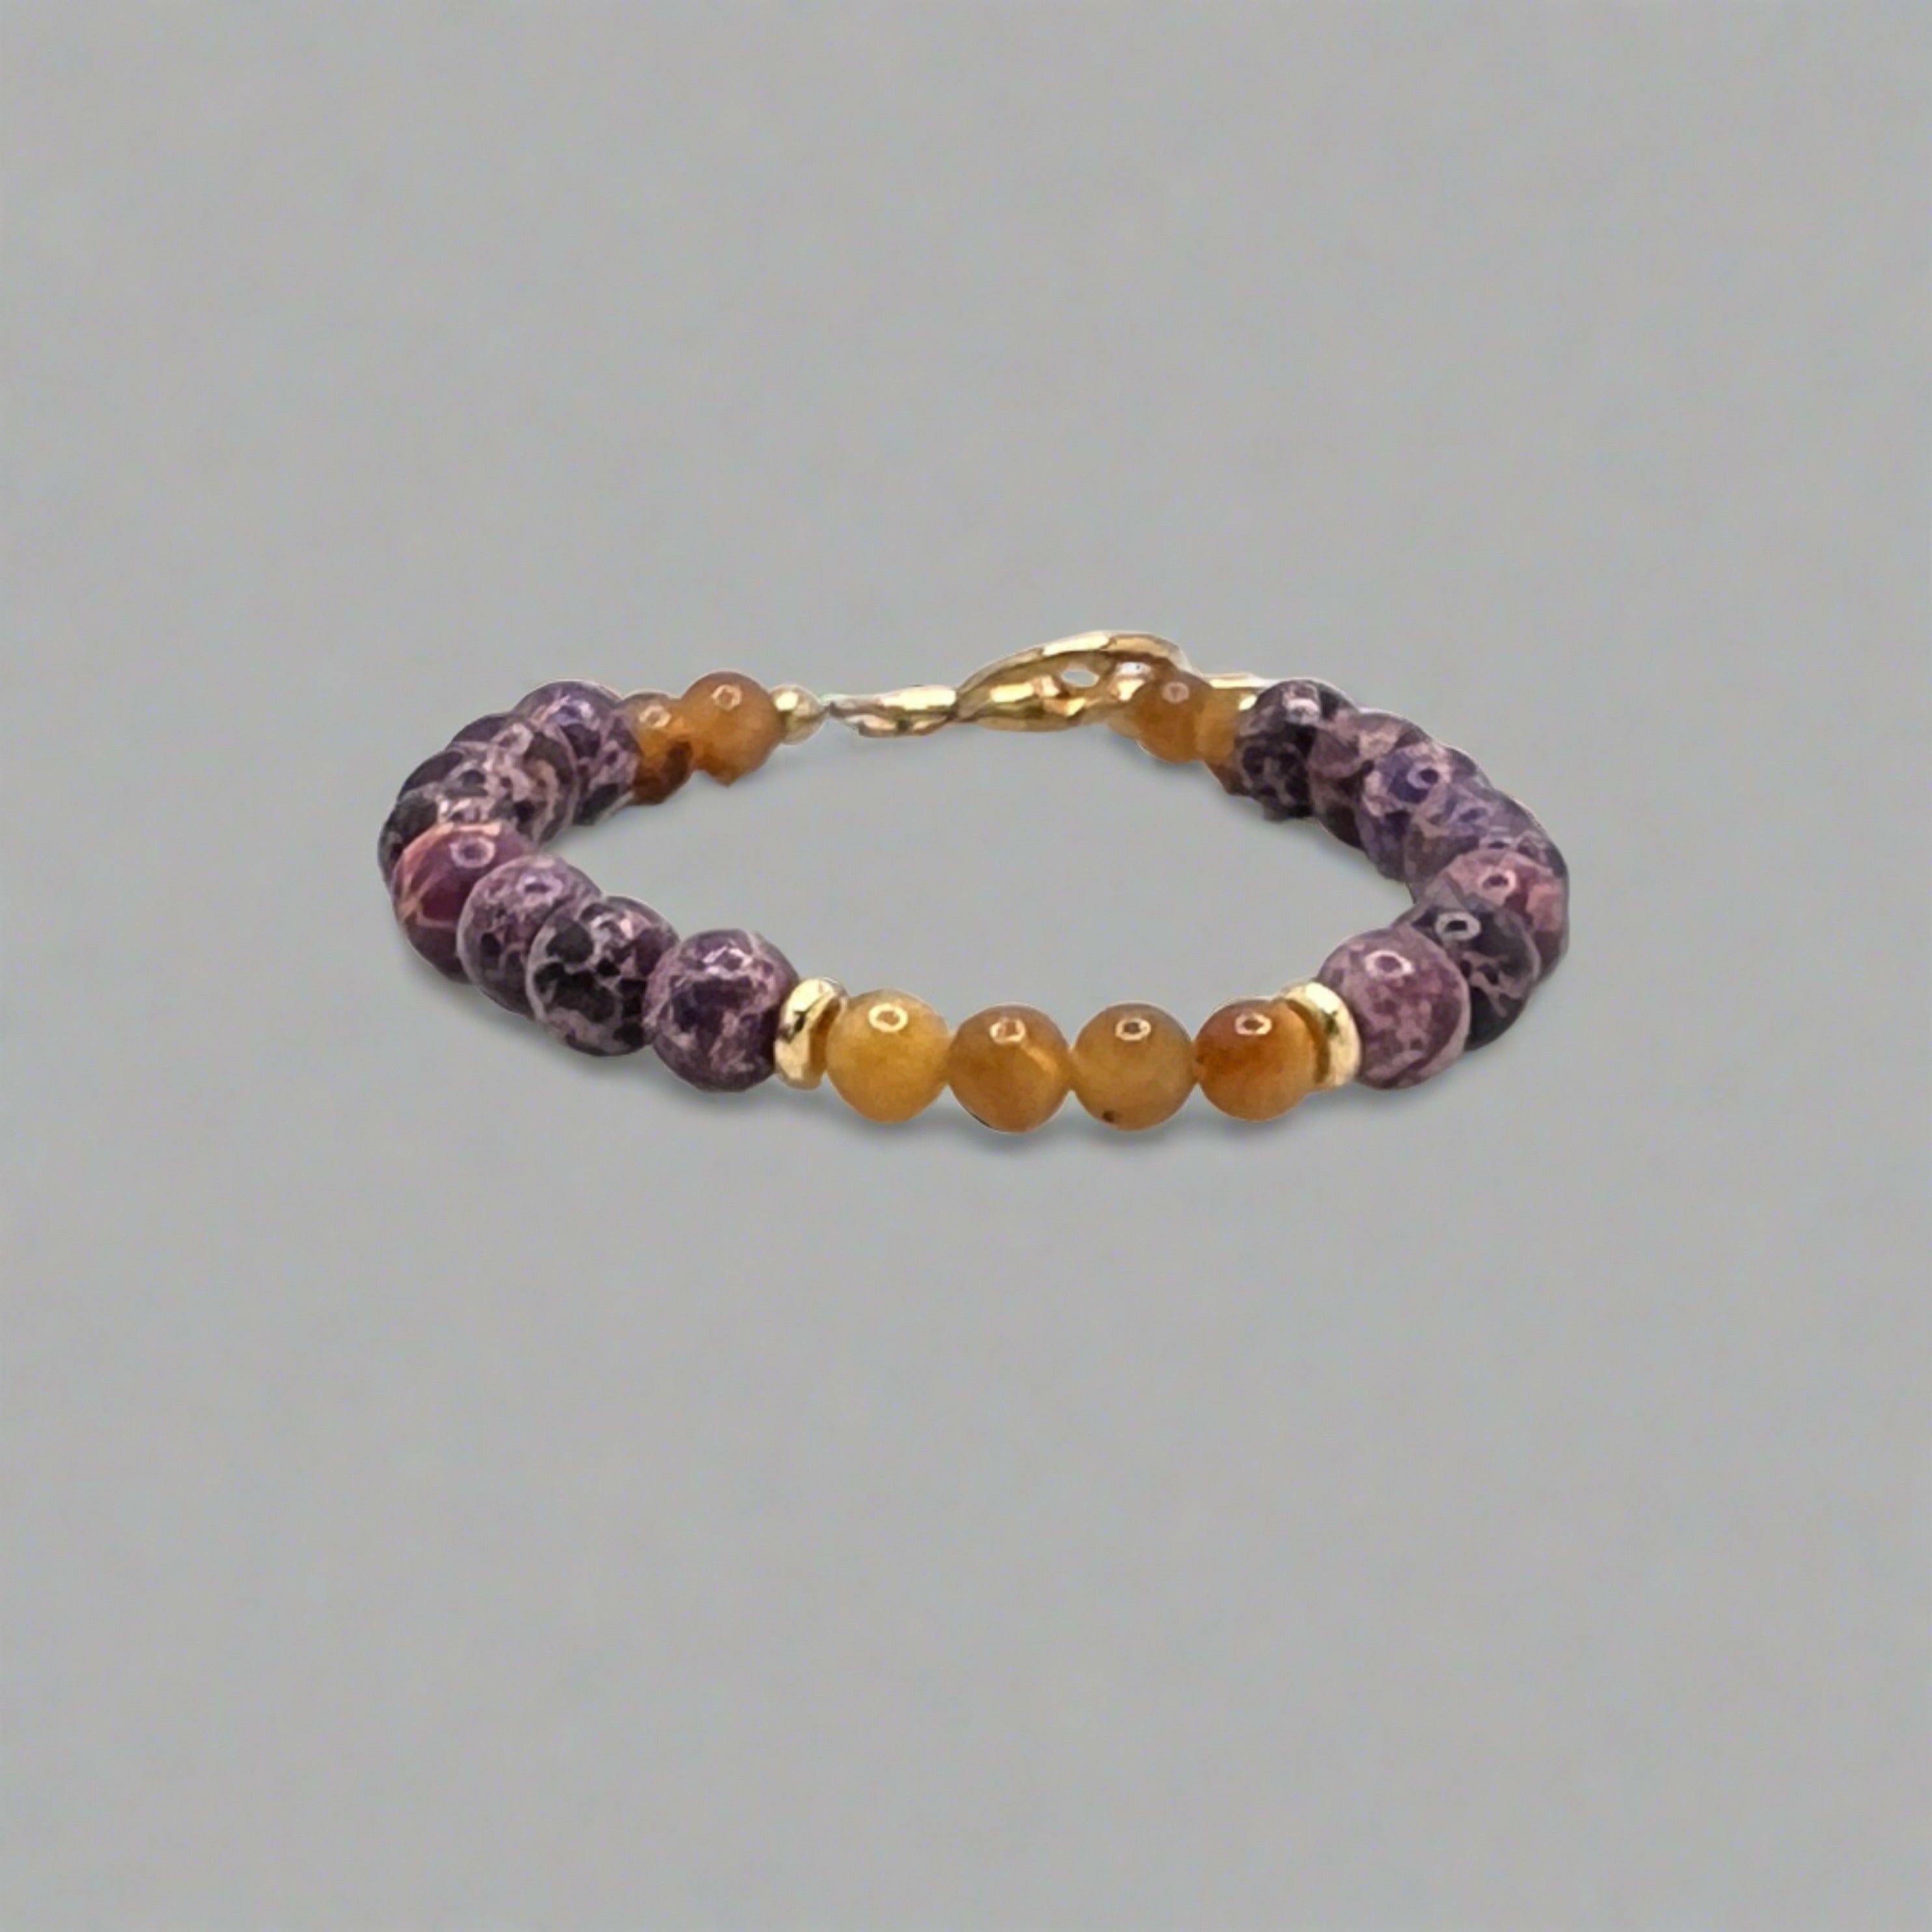 Bec Sue Jewelry Shop Exquisite Purple Jasper & Gold Tiger Eye Bracelet with Gold Clasp - 8mm/6mm Luxury Beaded Elegance Tags 712